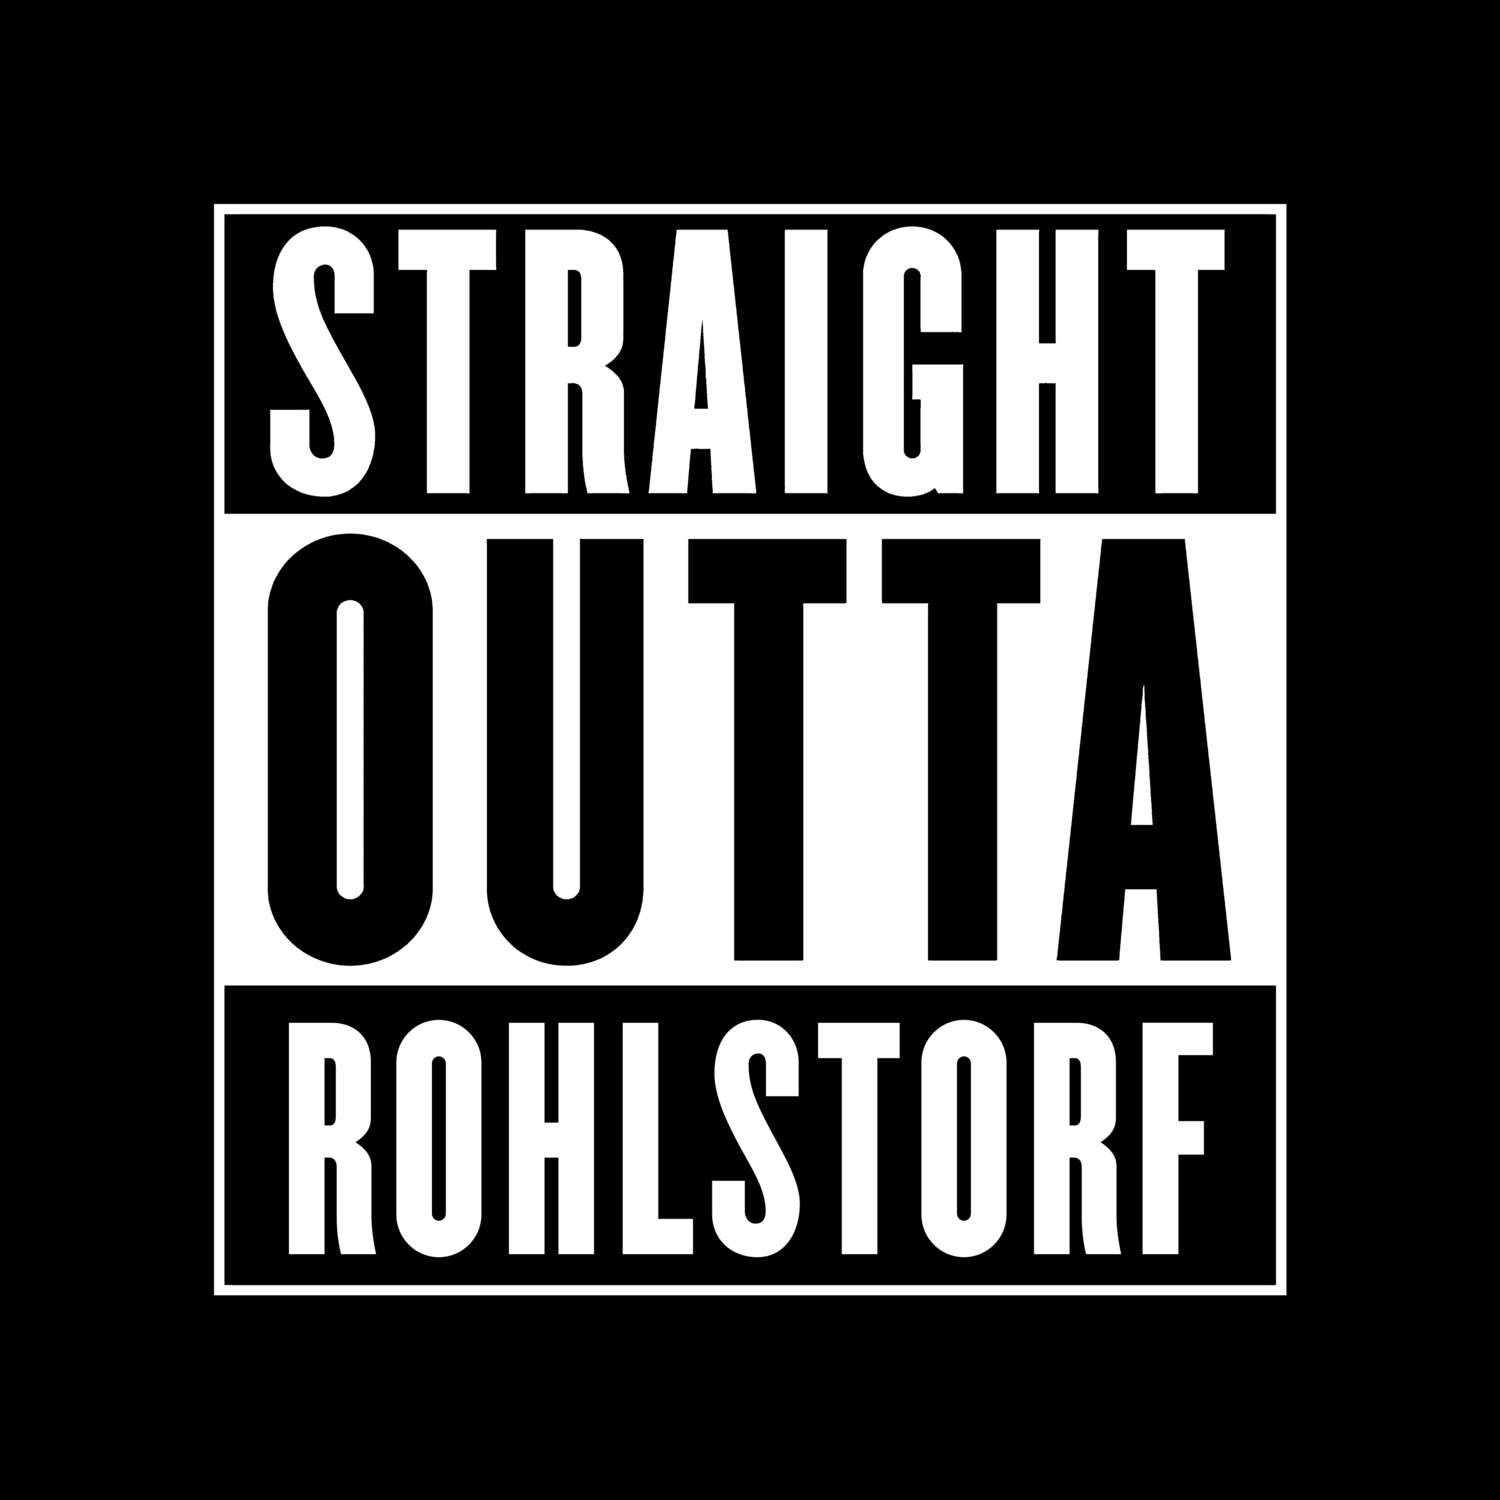 Rohlstorf T-Shirt »Straight Outta«